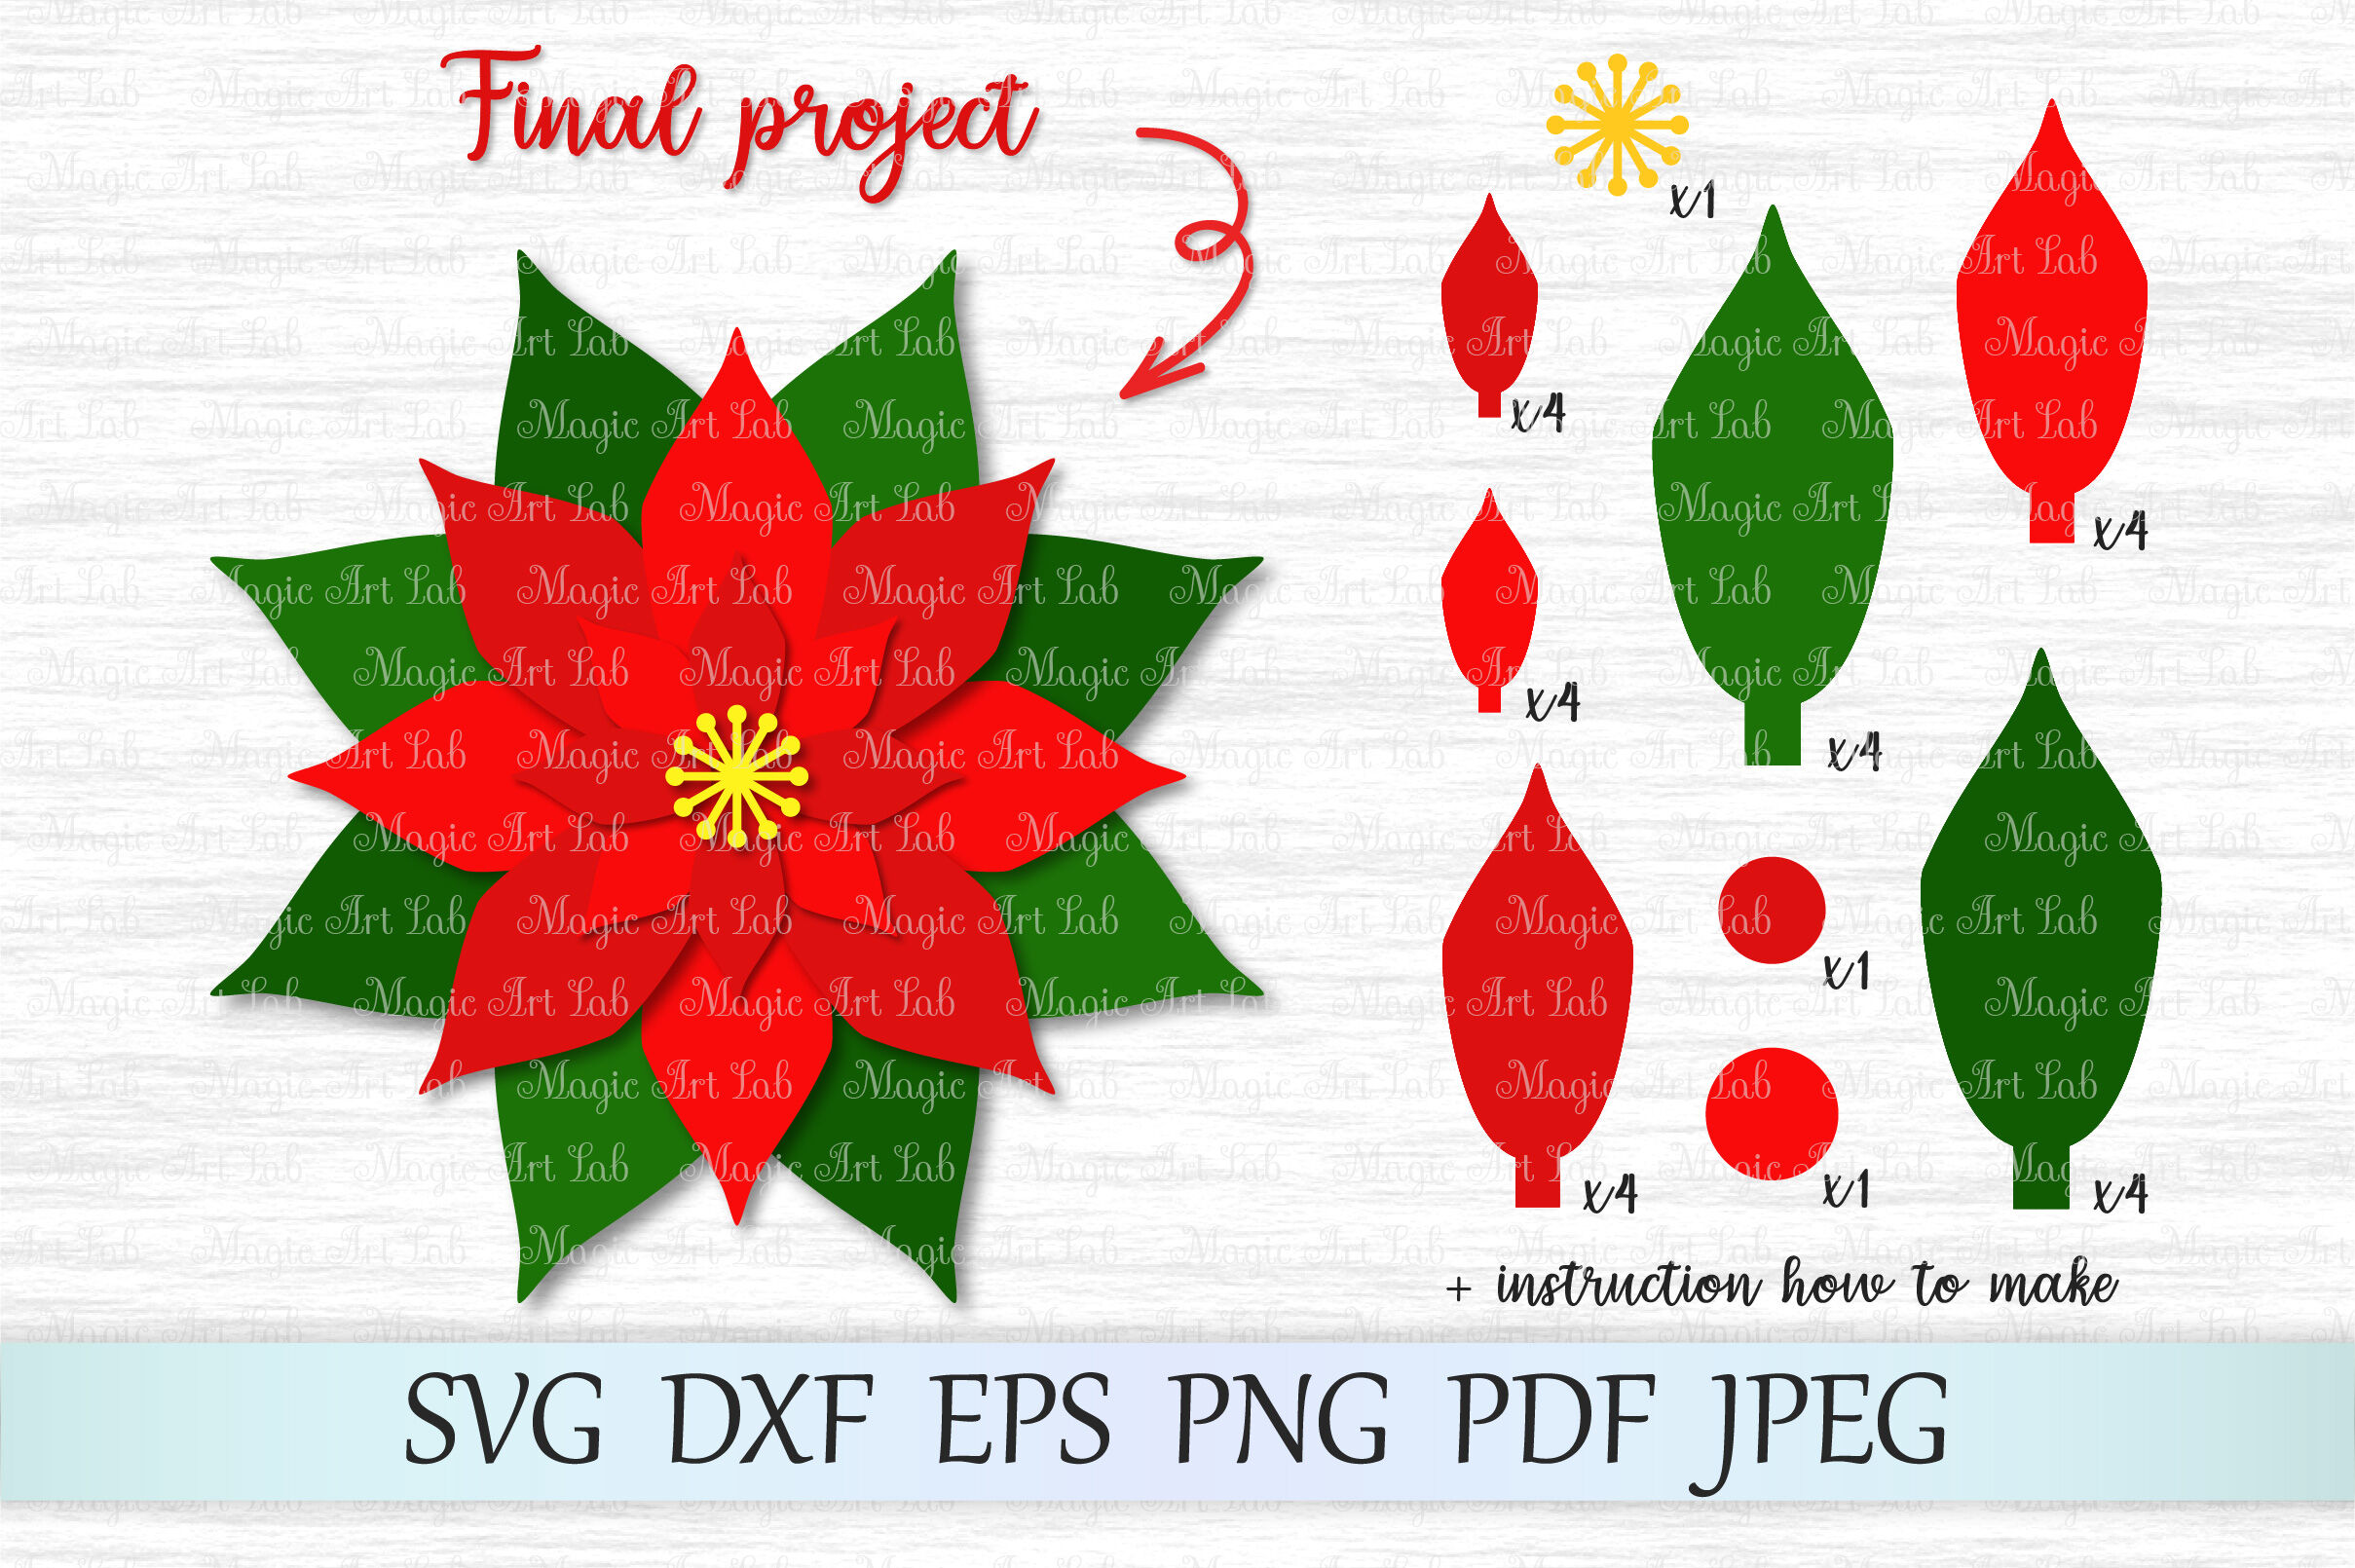 Layered Poinsettia Svg For SilhouetteSVG Files